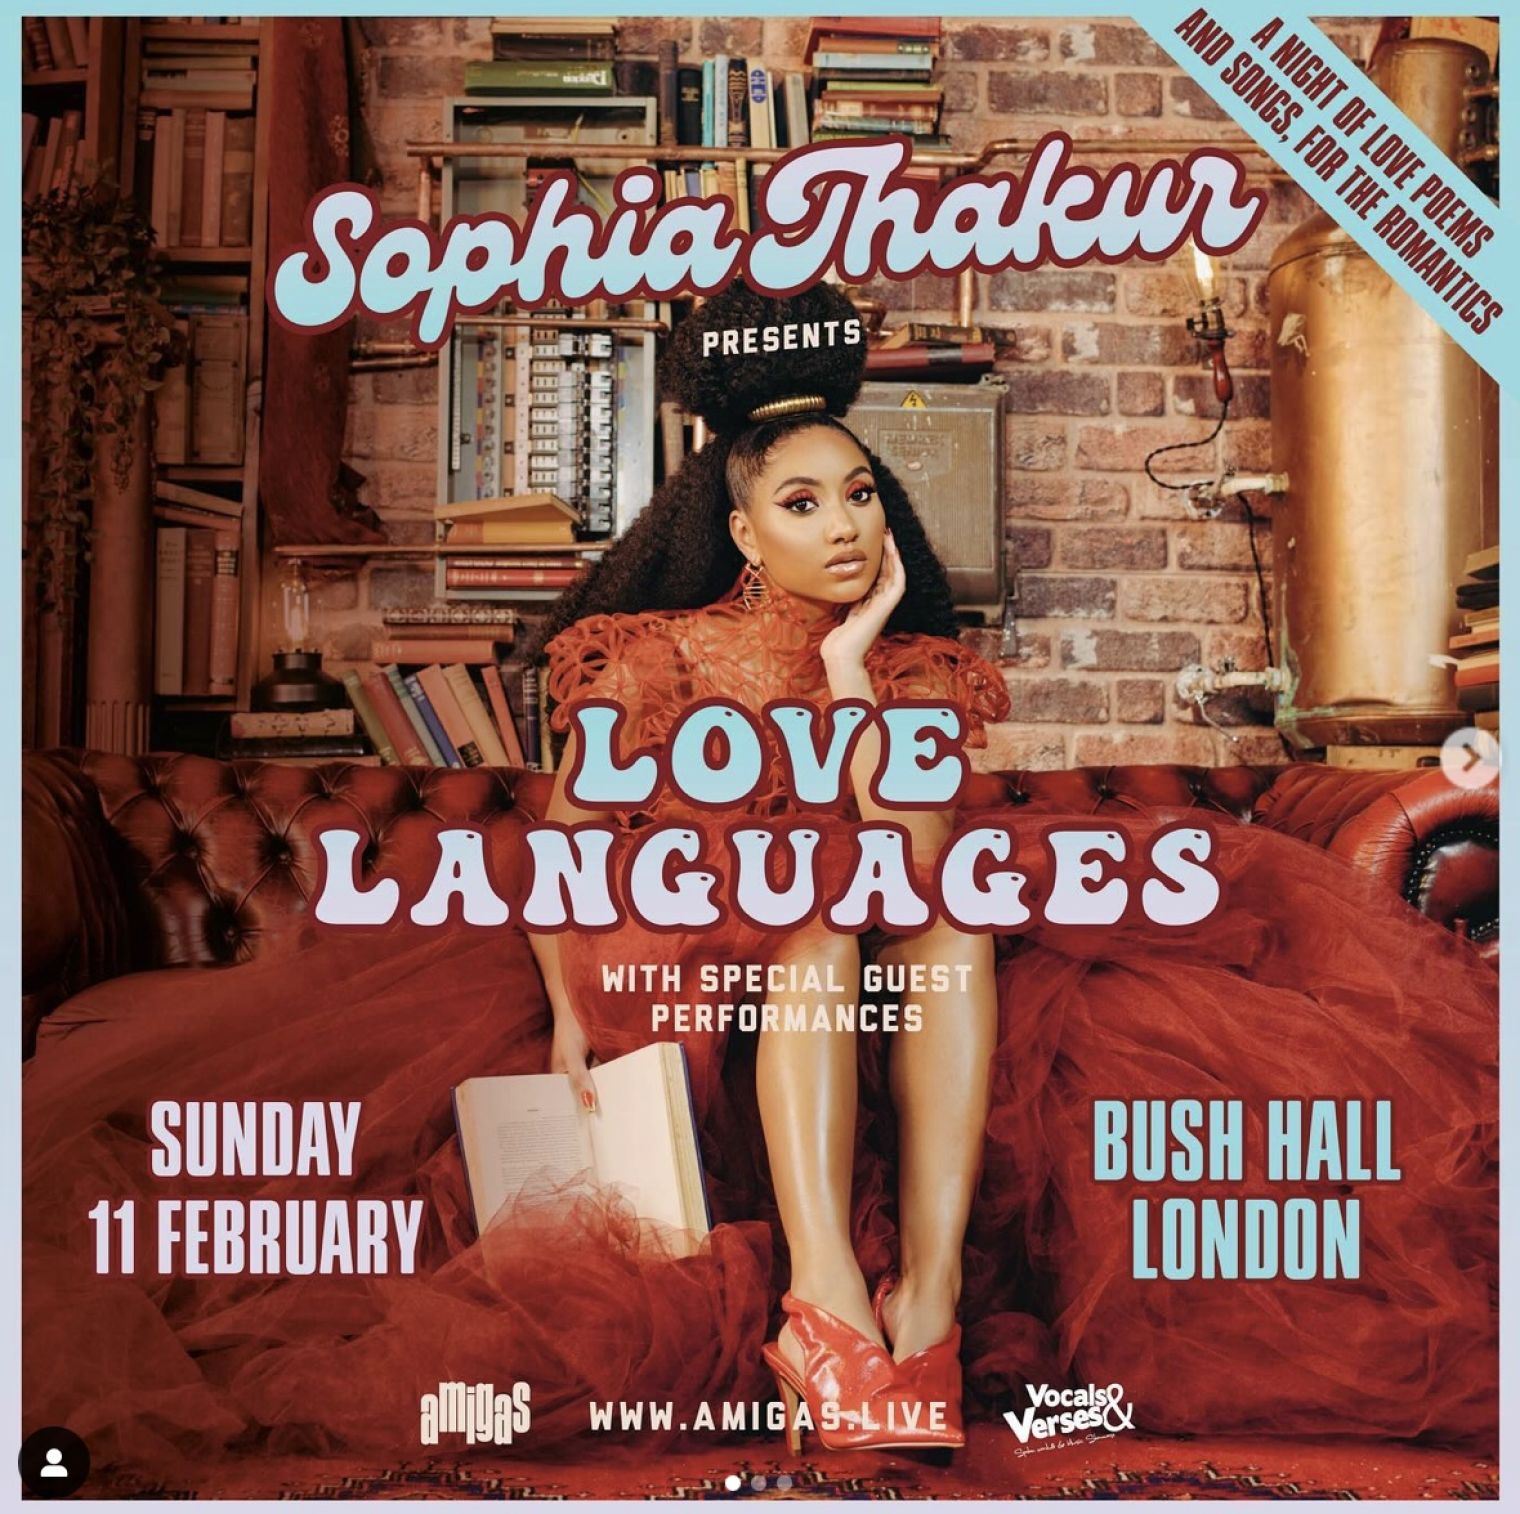 Sophia Thakur, described by Vogue as “one of the most adored poets of our time”, brings her latest live show ‘Love Languages’ to London this weekend